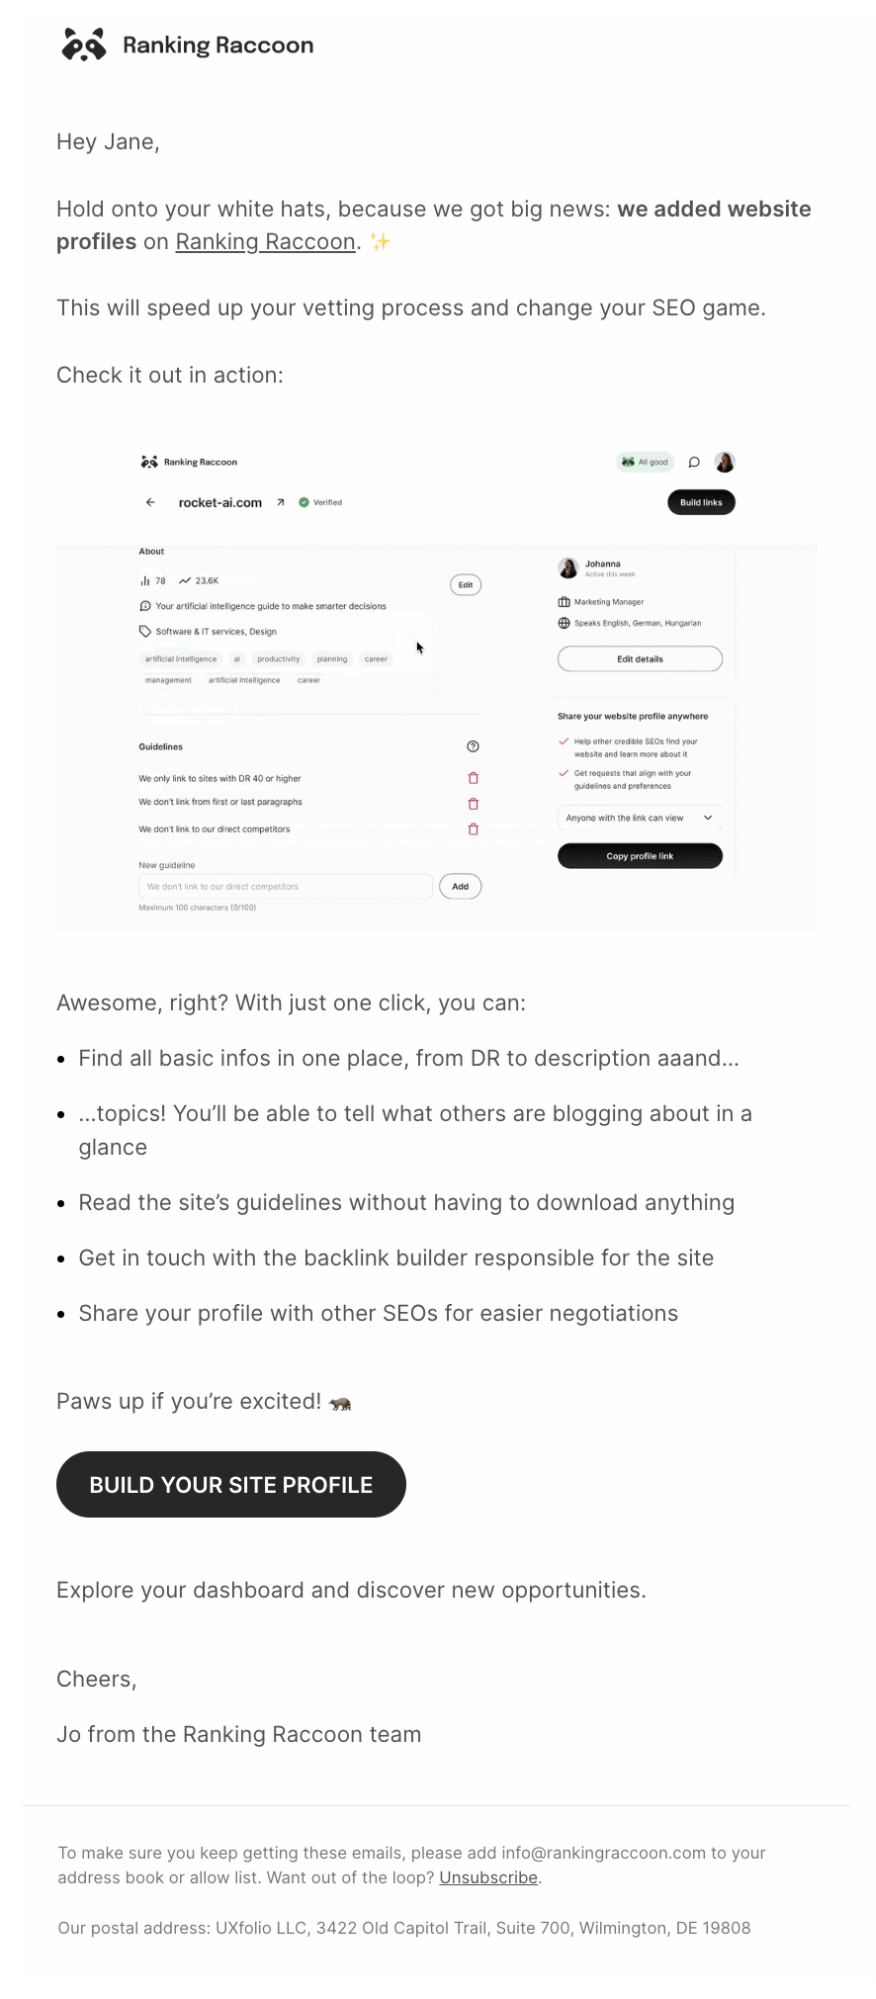 GIFs in SaaS Emails: Screenshot of Ranking Raccoon's feature announcement email